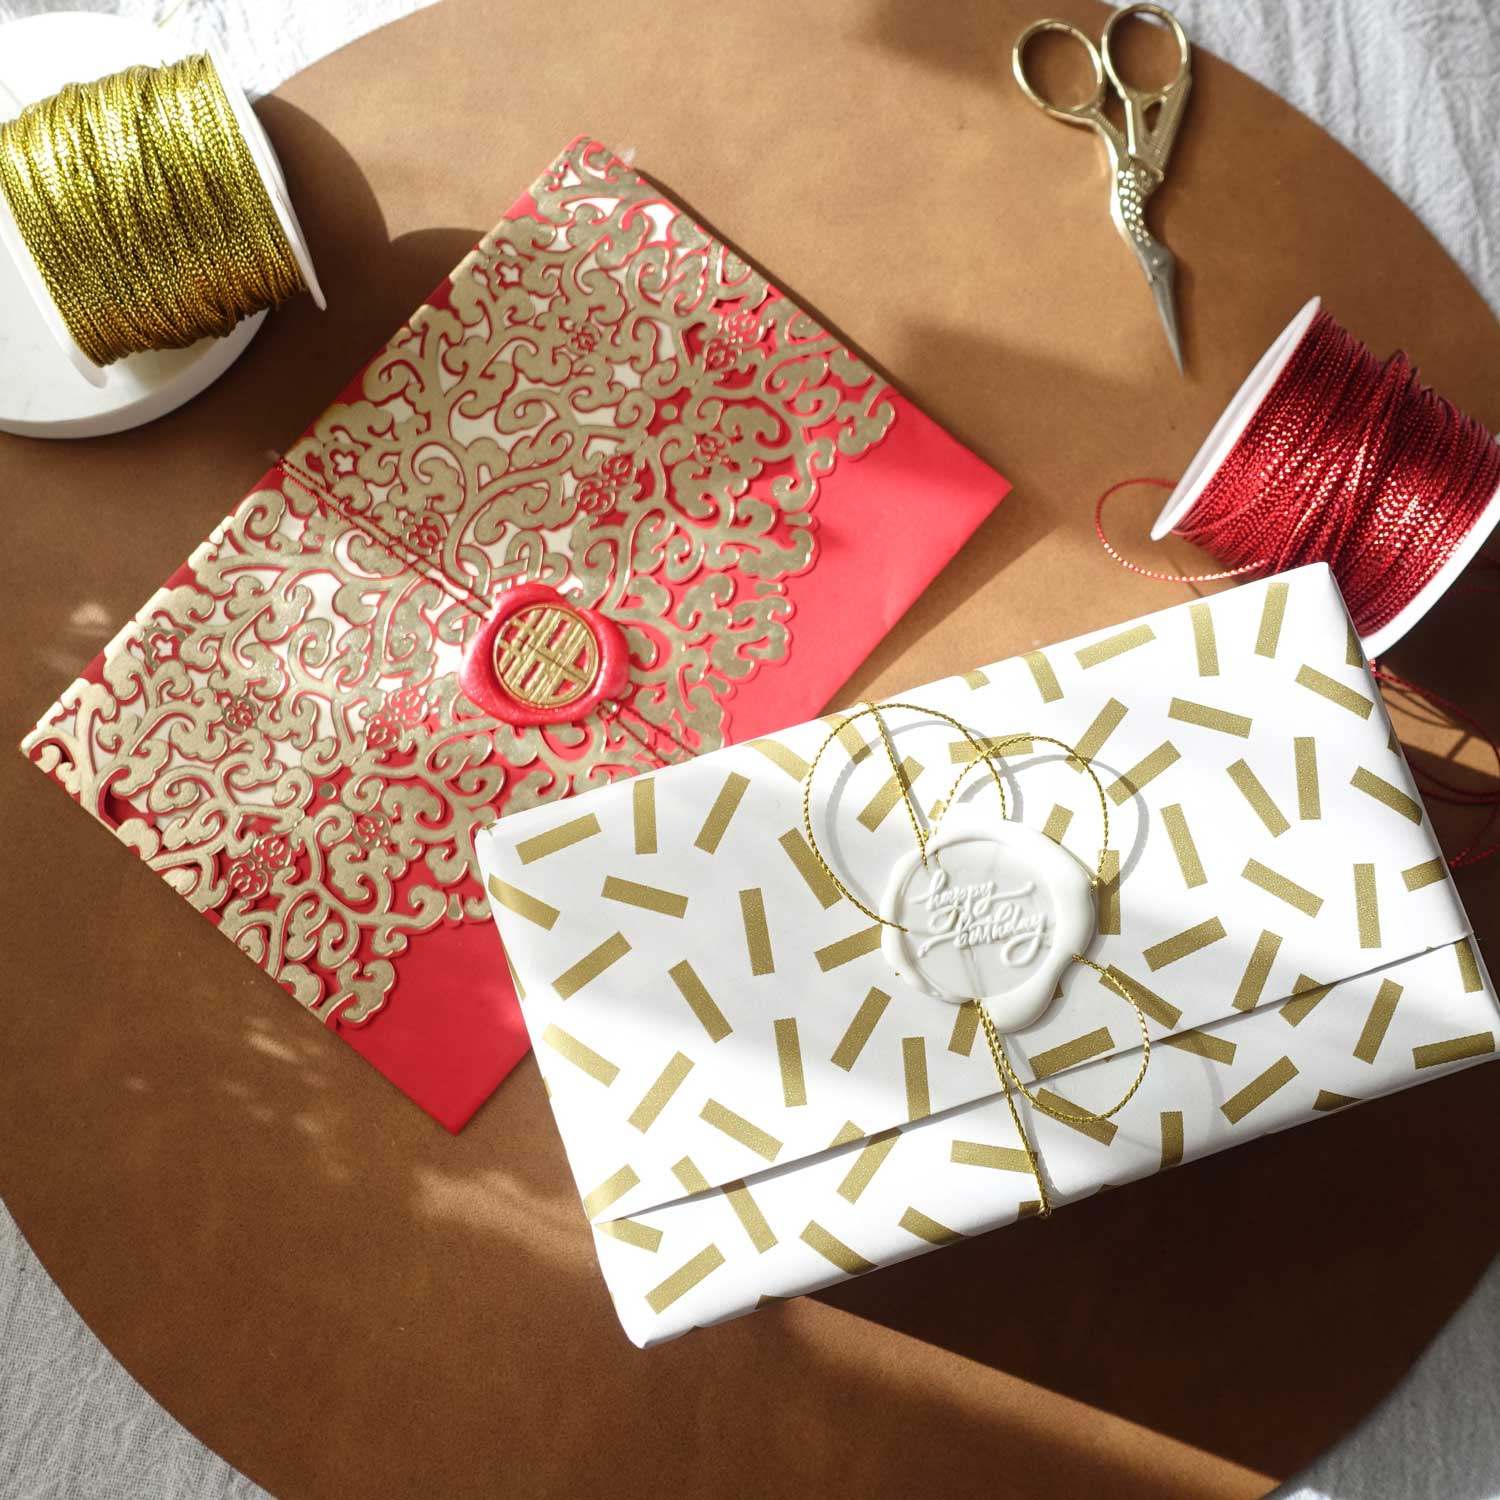 chinese wedding invitation with red metallic cord and happy birthday wax seal with thin gold cord gift wrapping idea